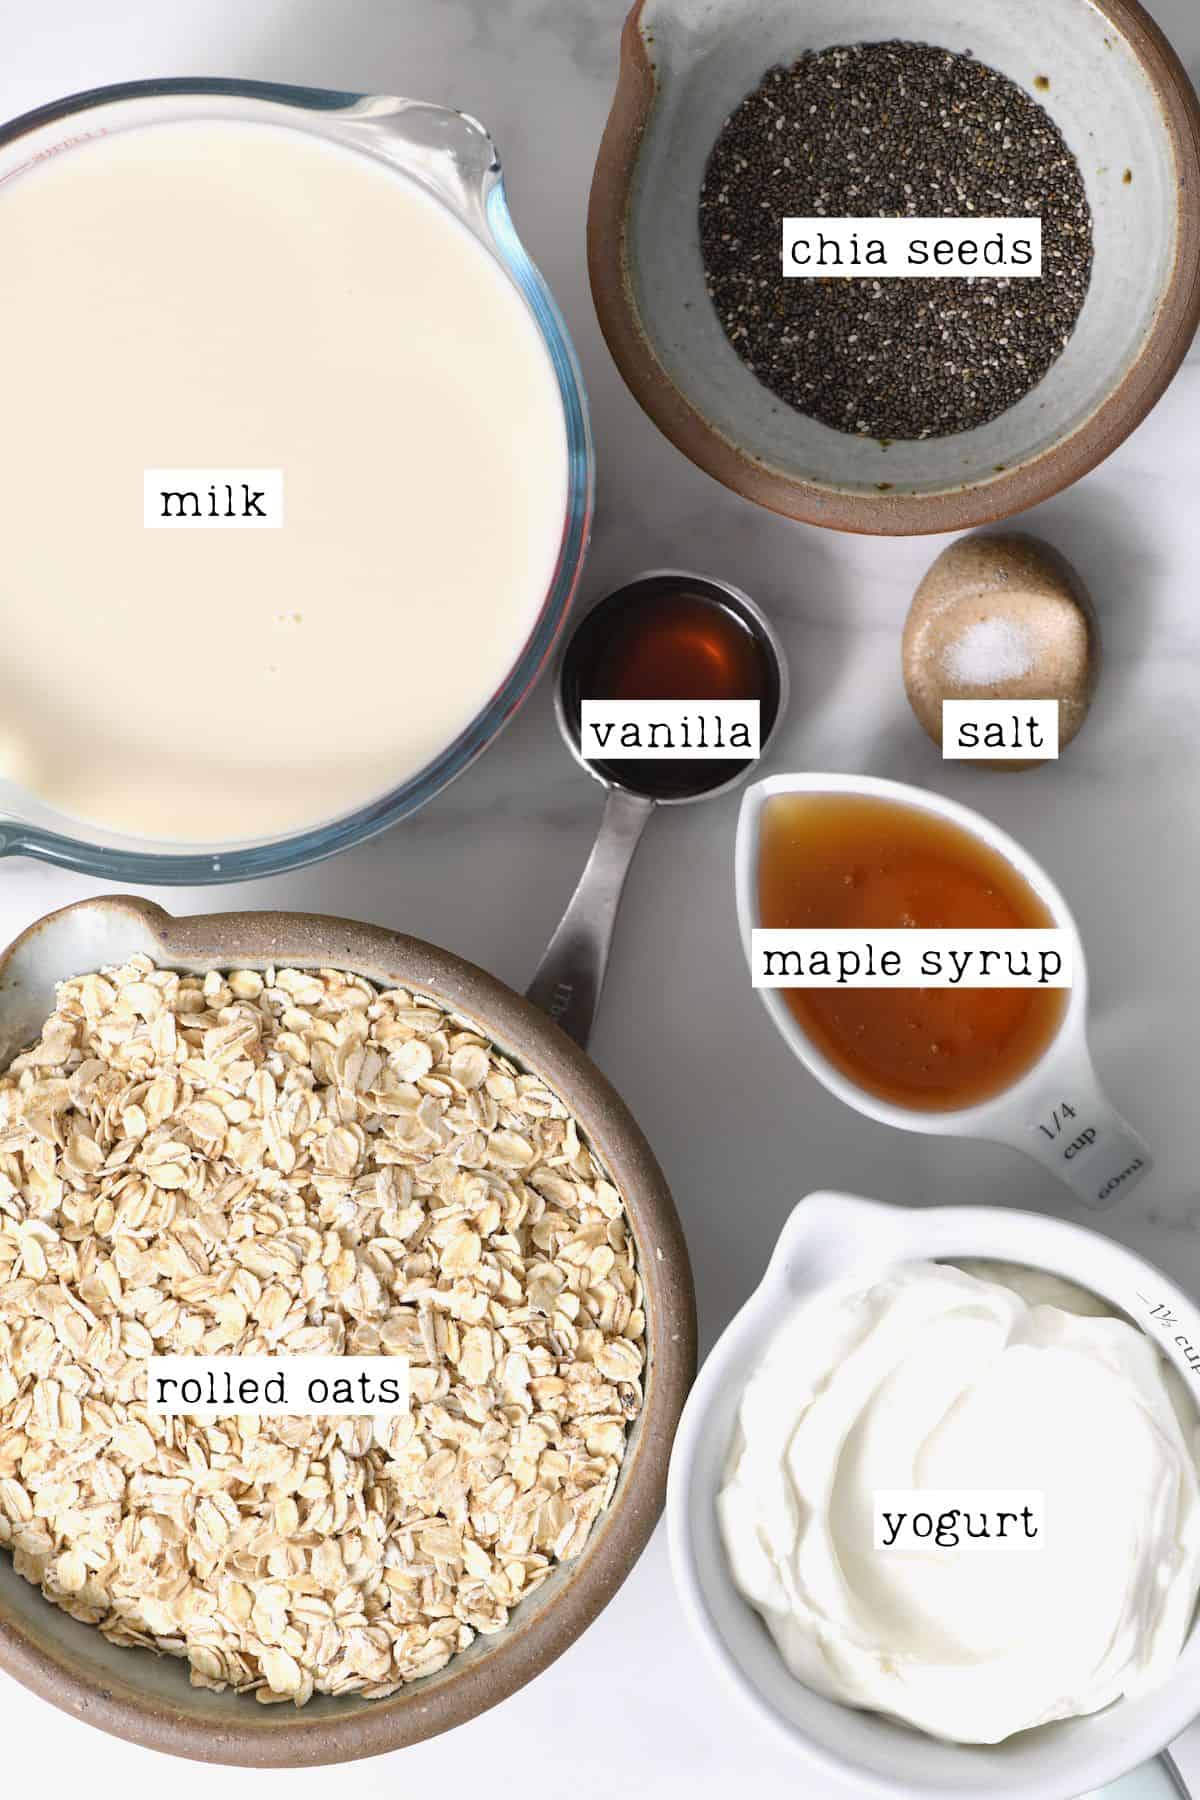 Ingredients for overnight oats